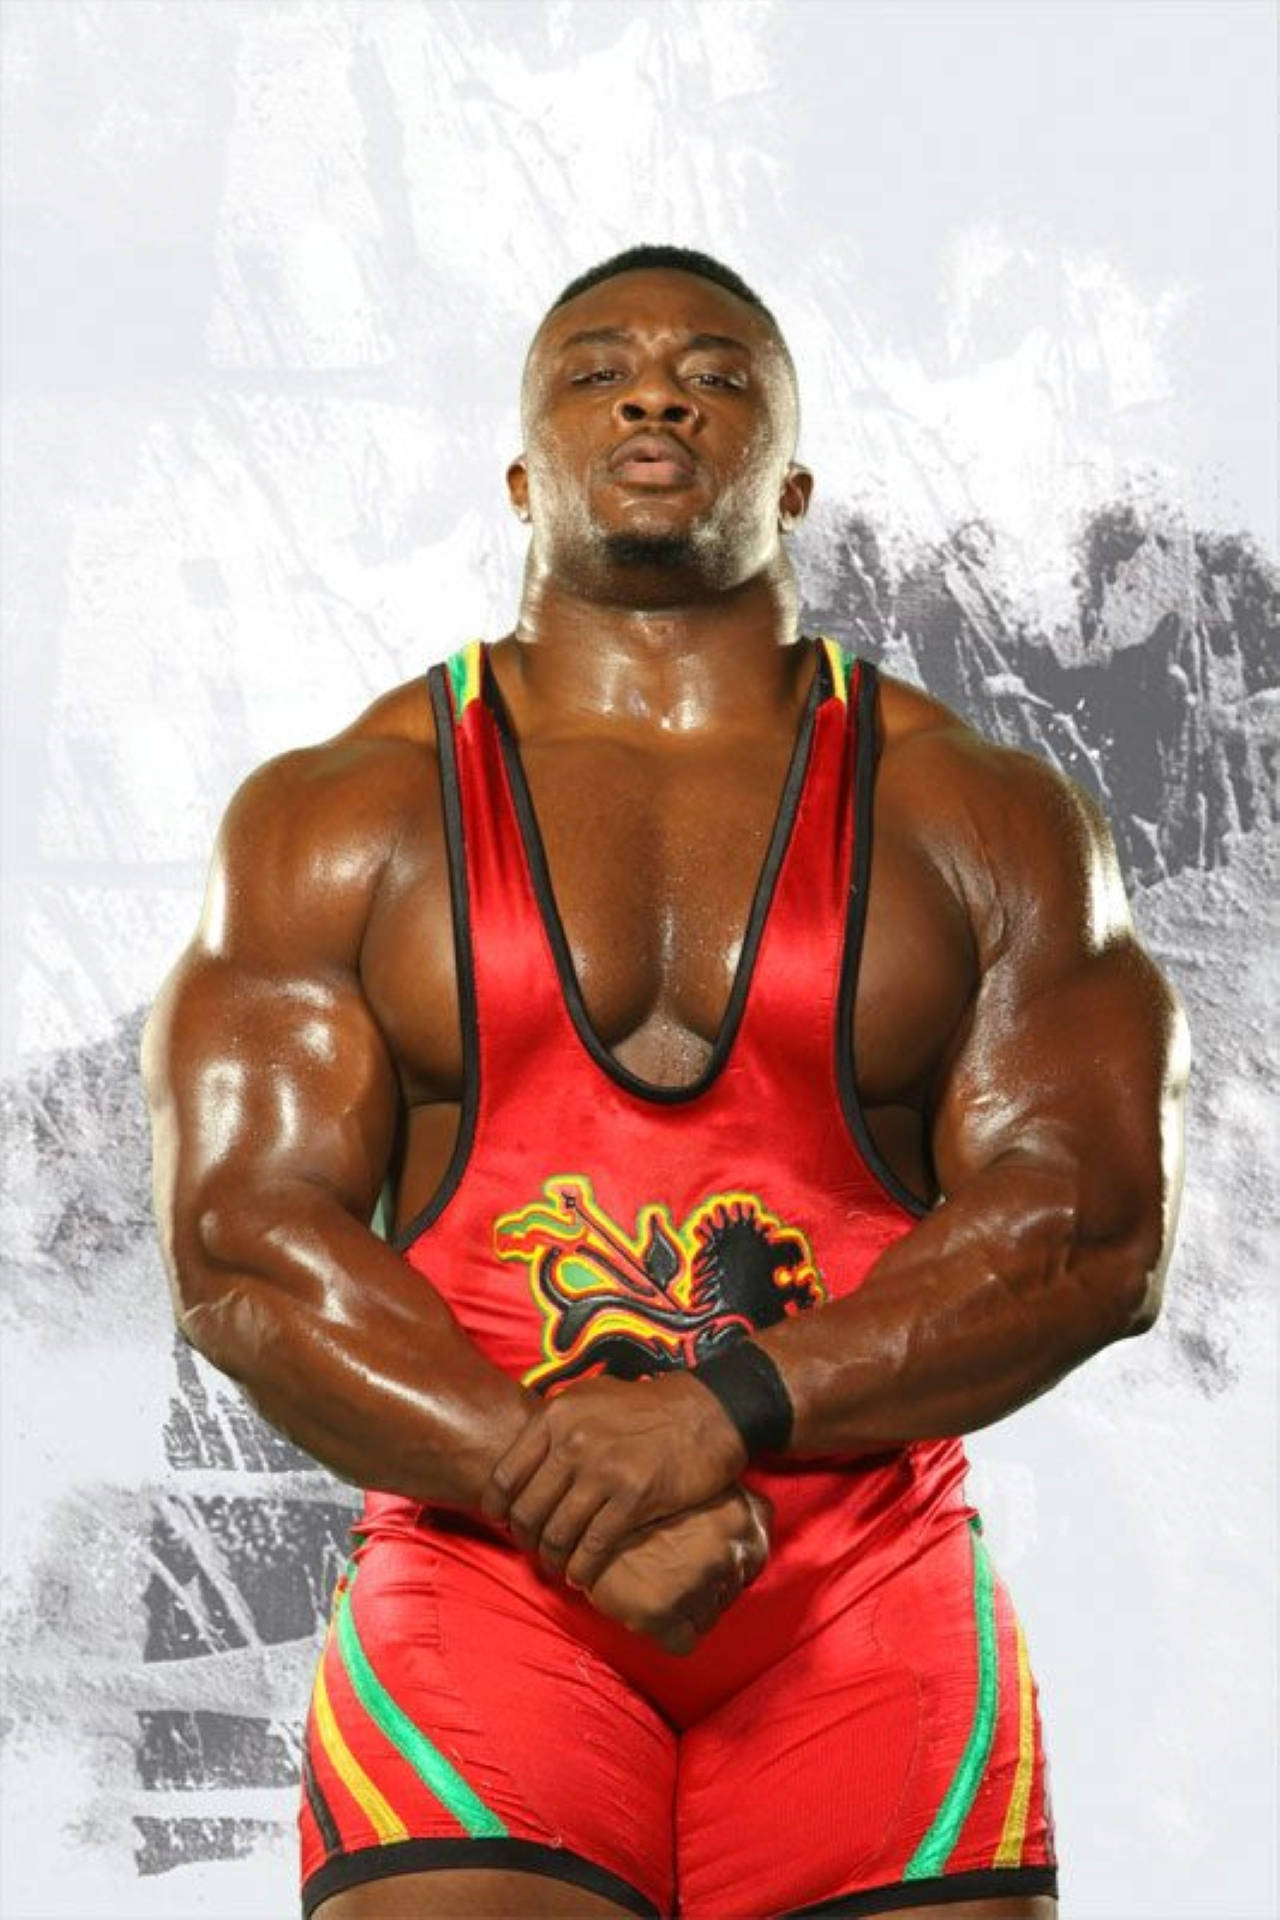 Caption: Big E, a Talented American Wrestler, Displaying His Muscular Physique Wallpaper